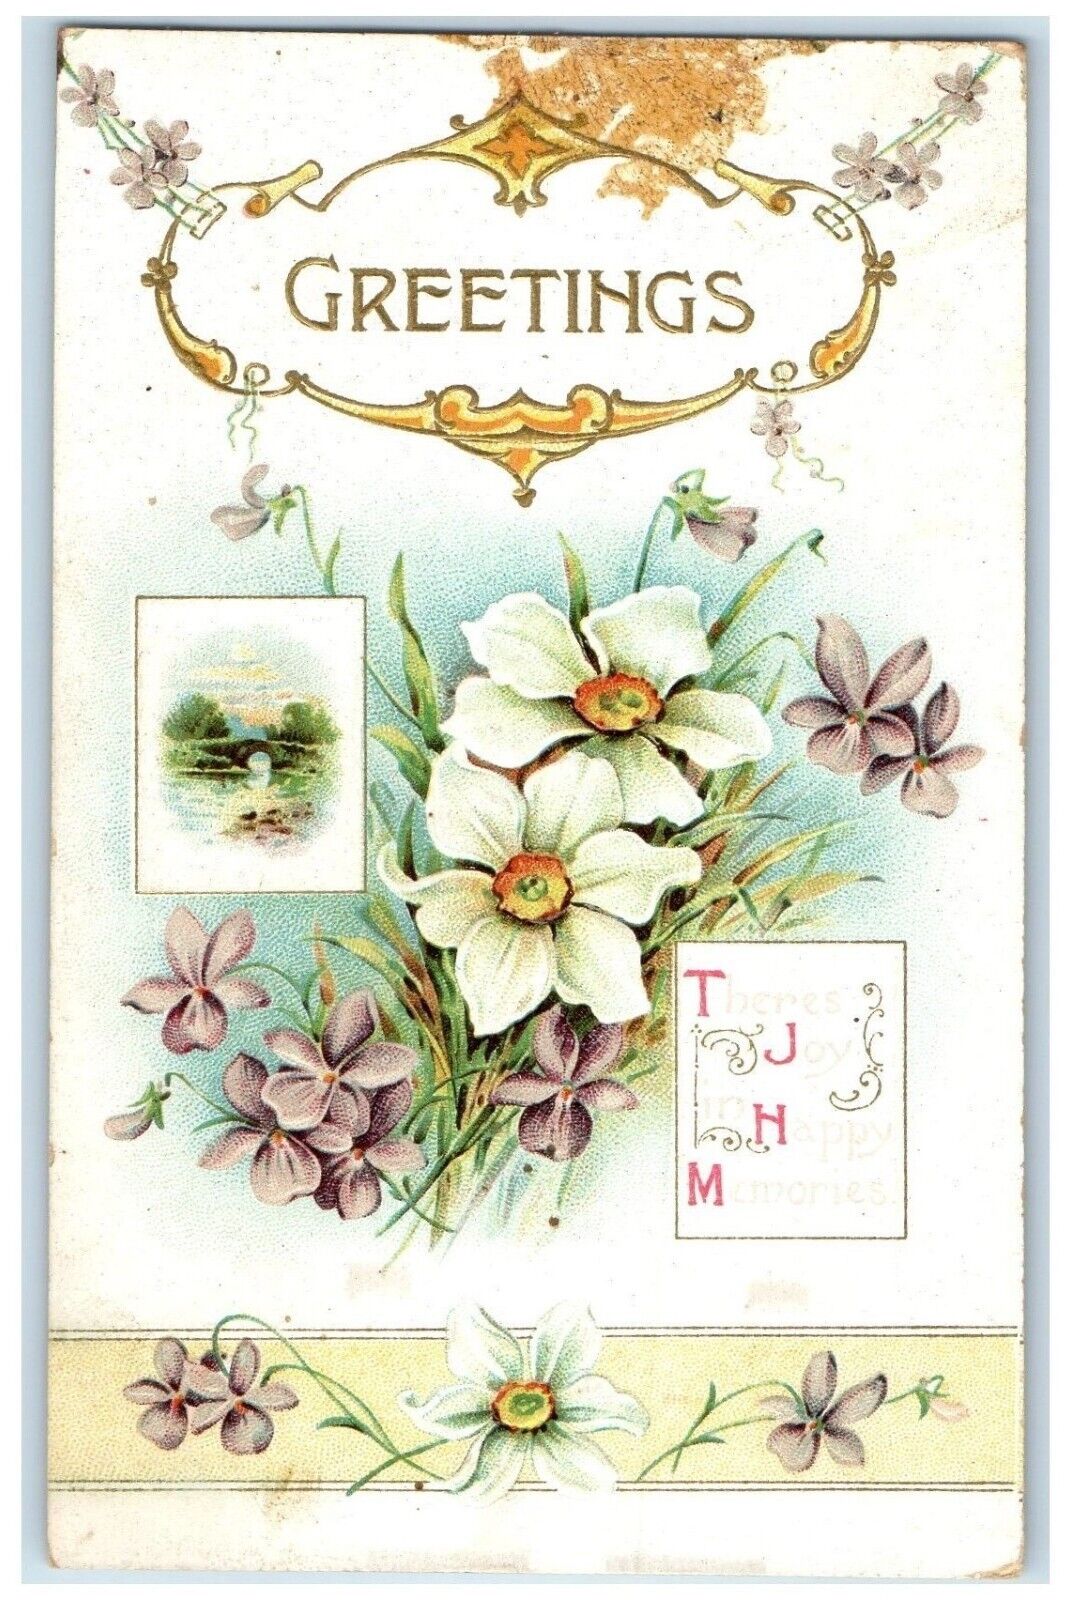 1909 Greetings TJHM Flowers Embossed Rye Colorado CO Posted Antique Postcard